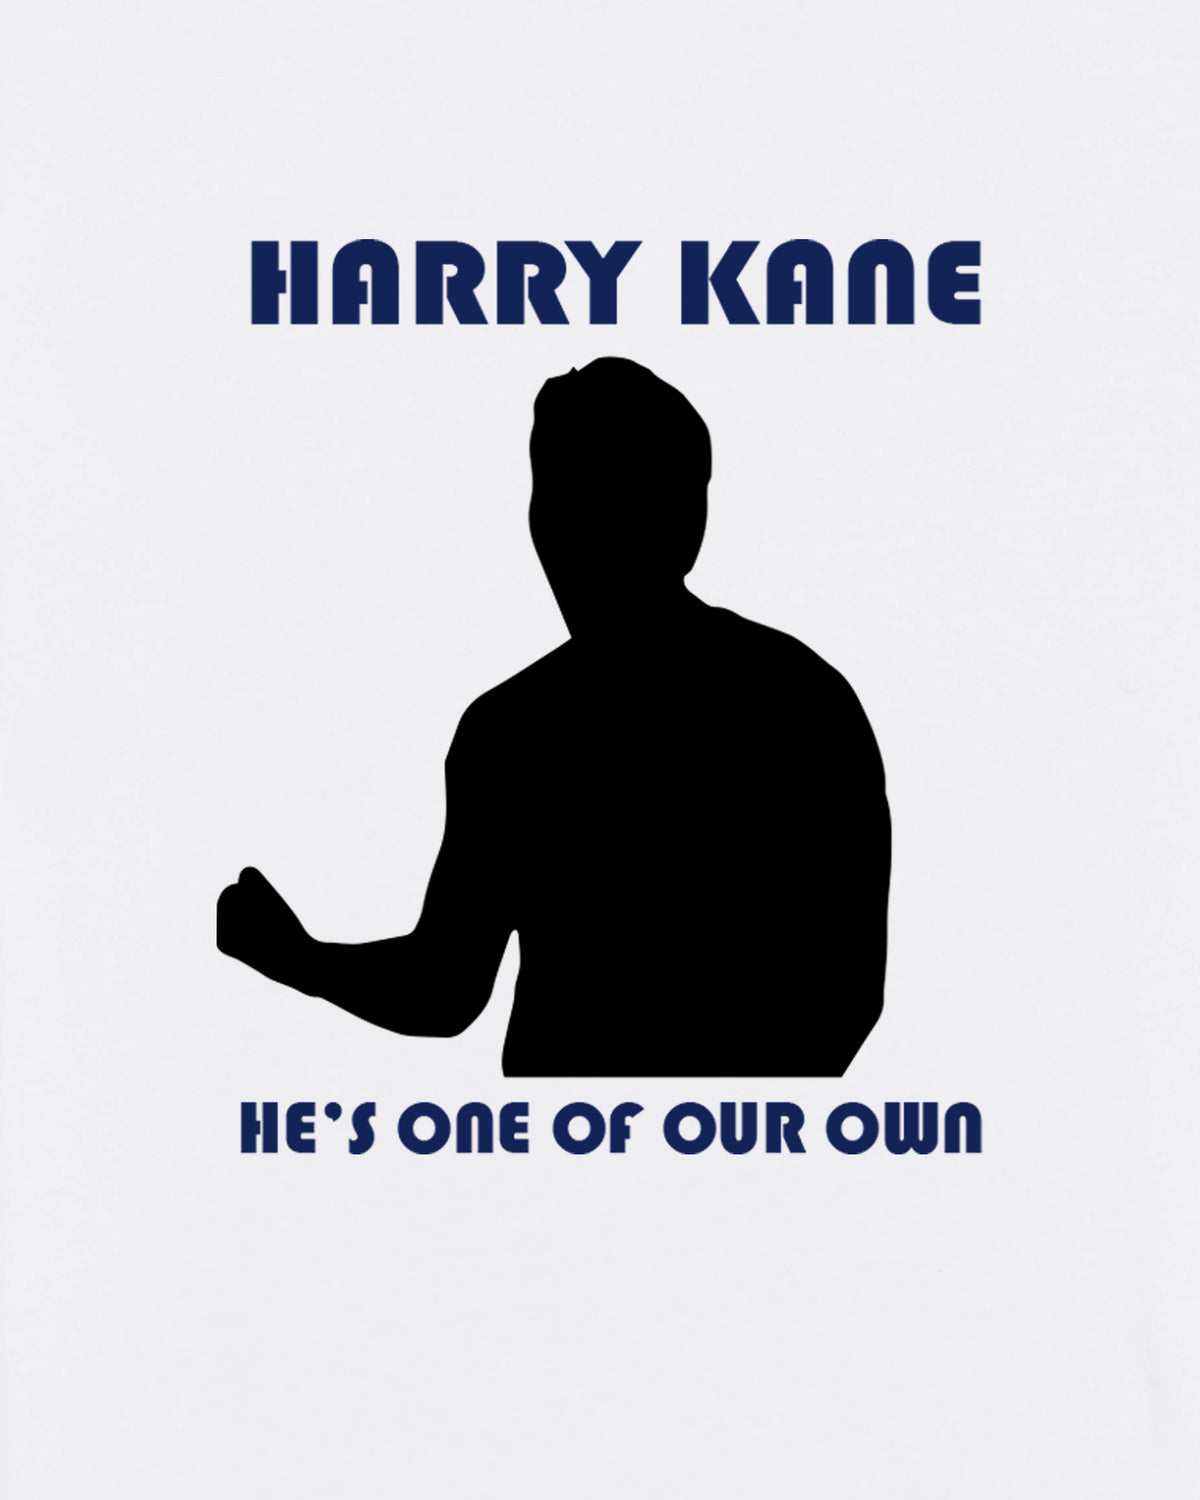 Harry Kane - Our own